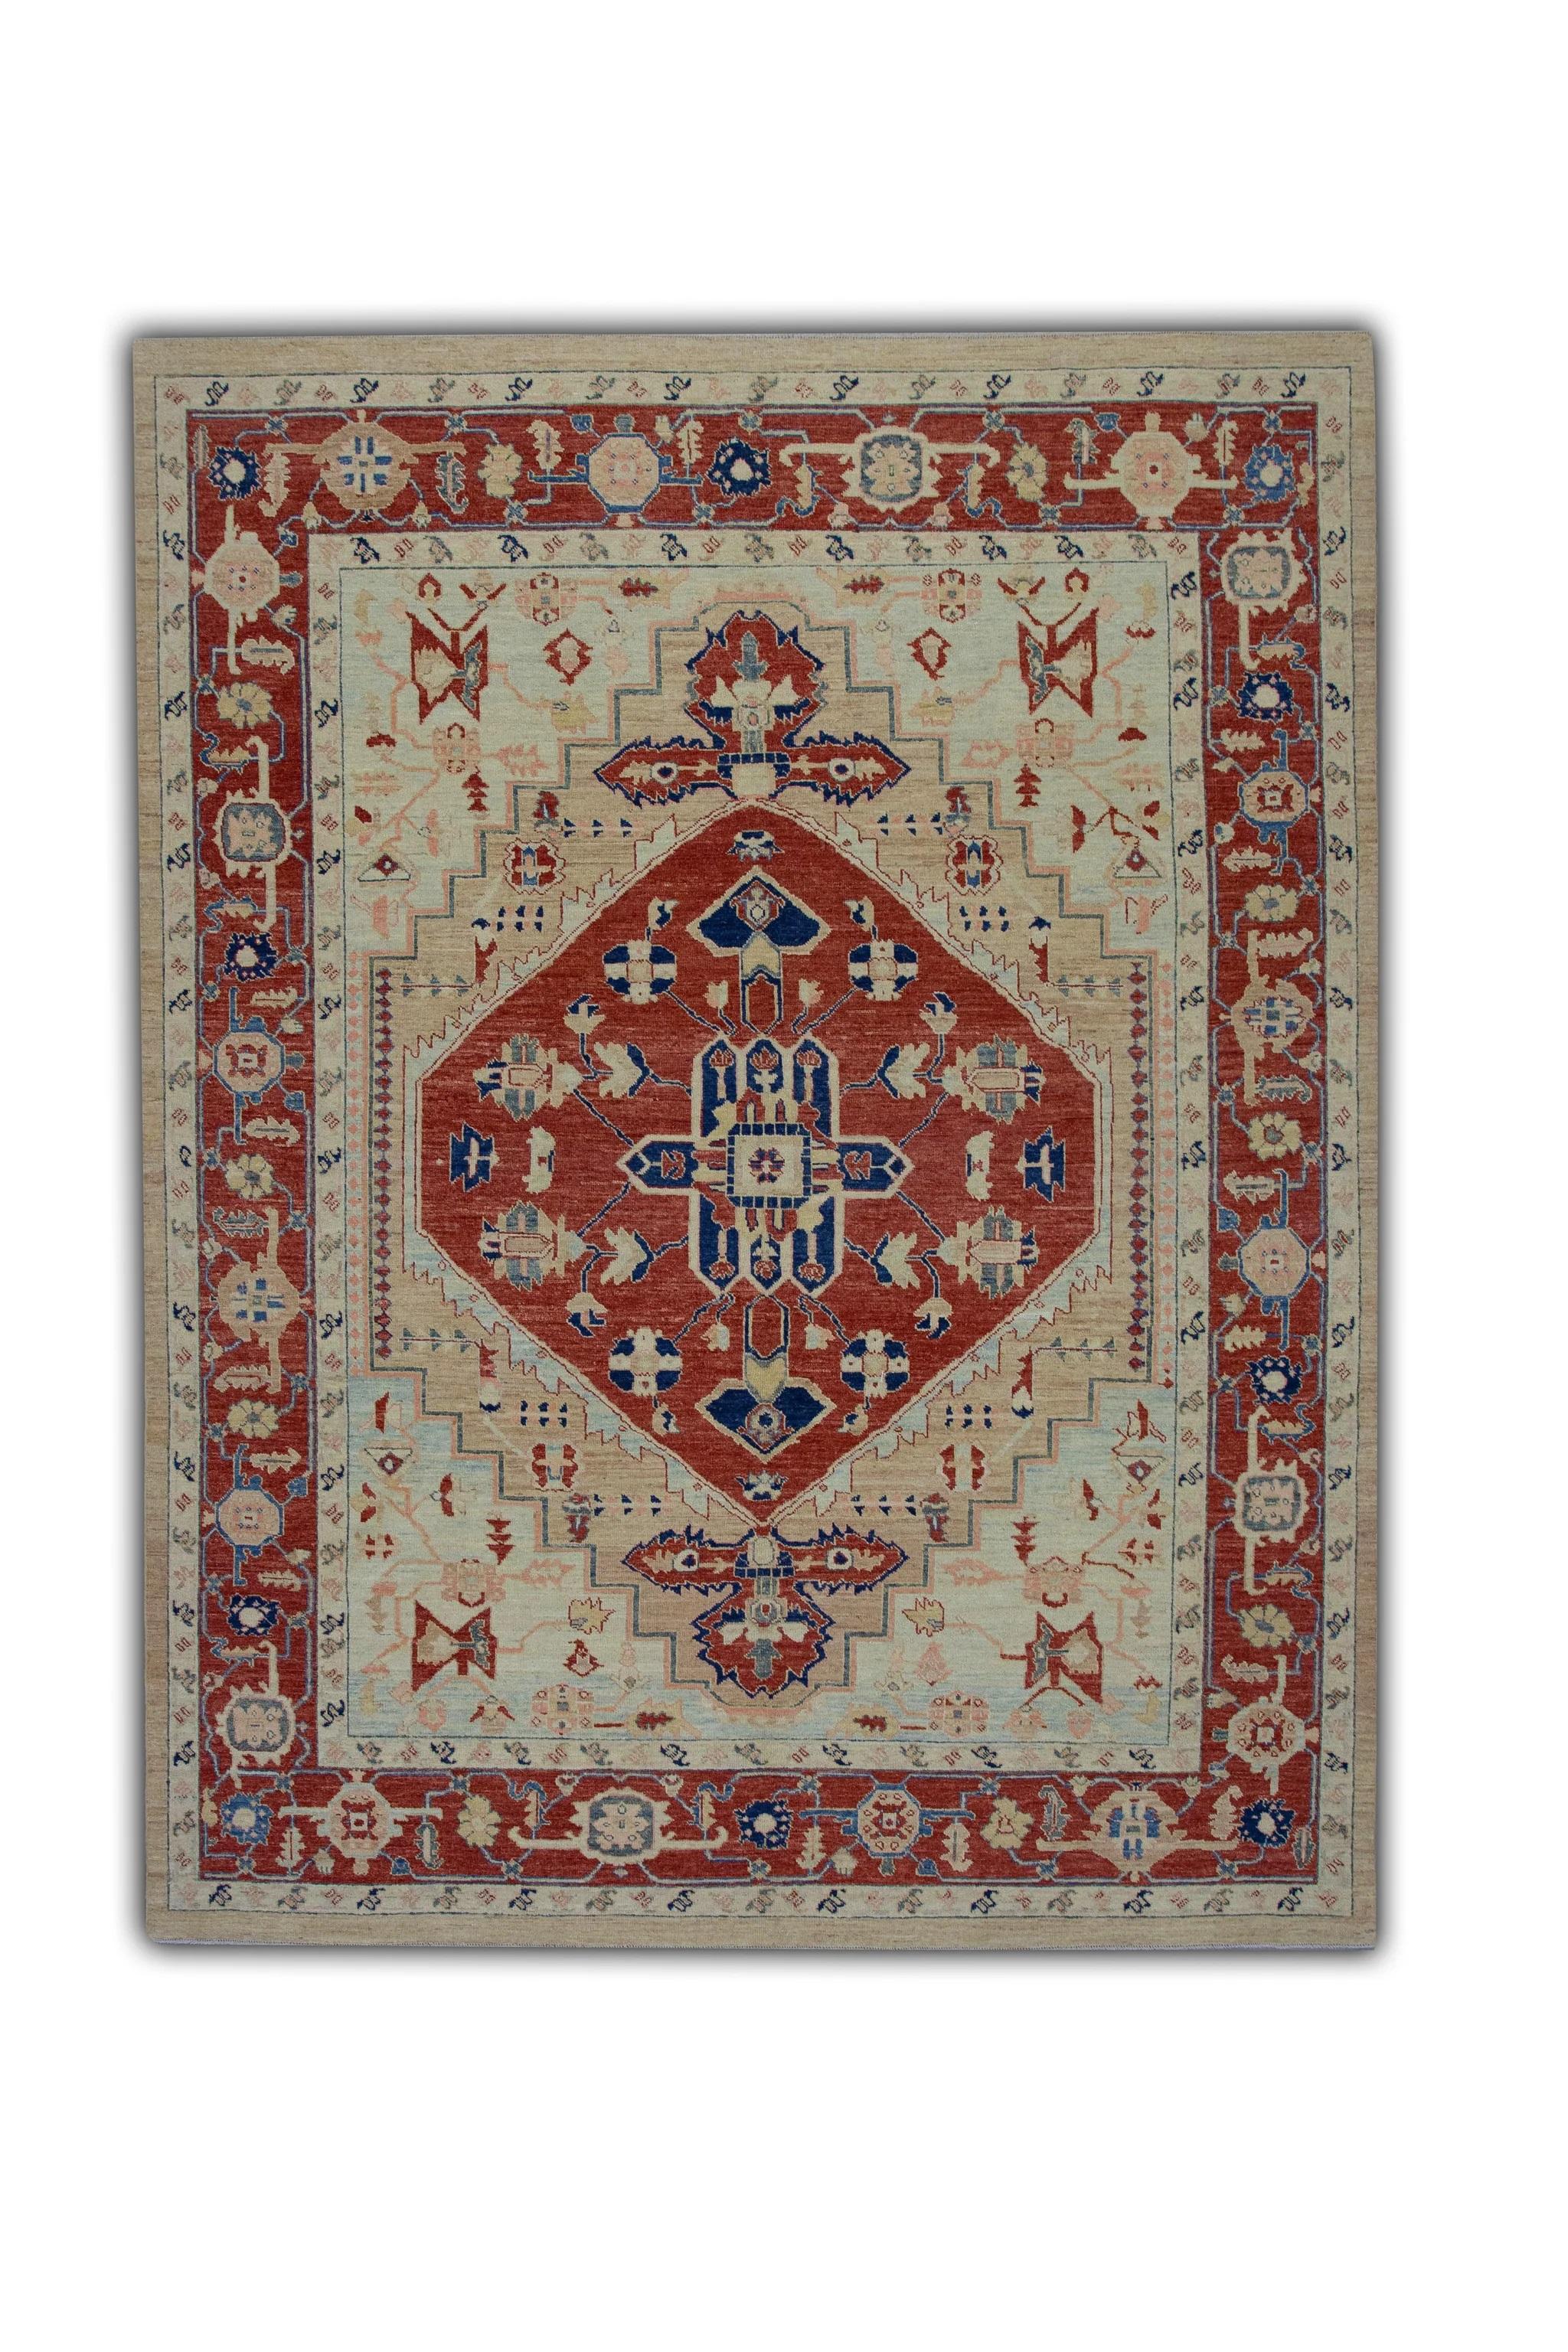 Floral Turkish Finewoven Wool Oushak Rug in Bright Red and Blue 7'10